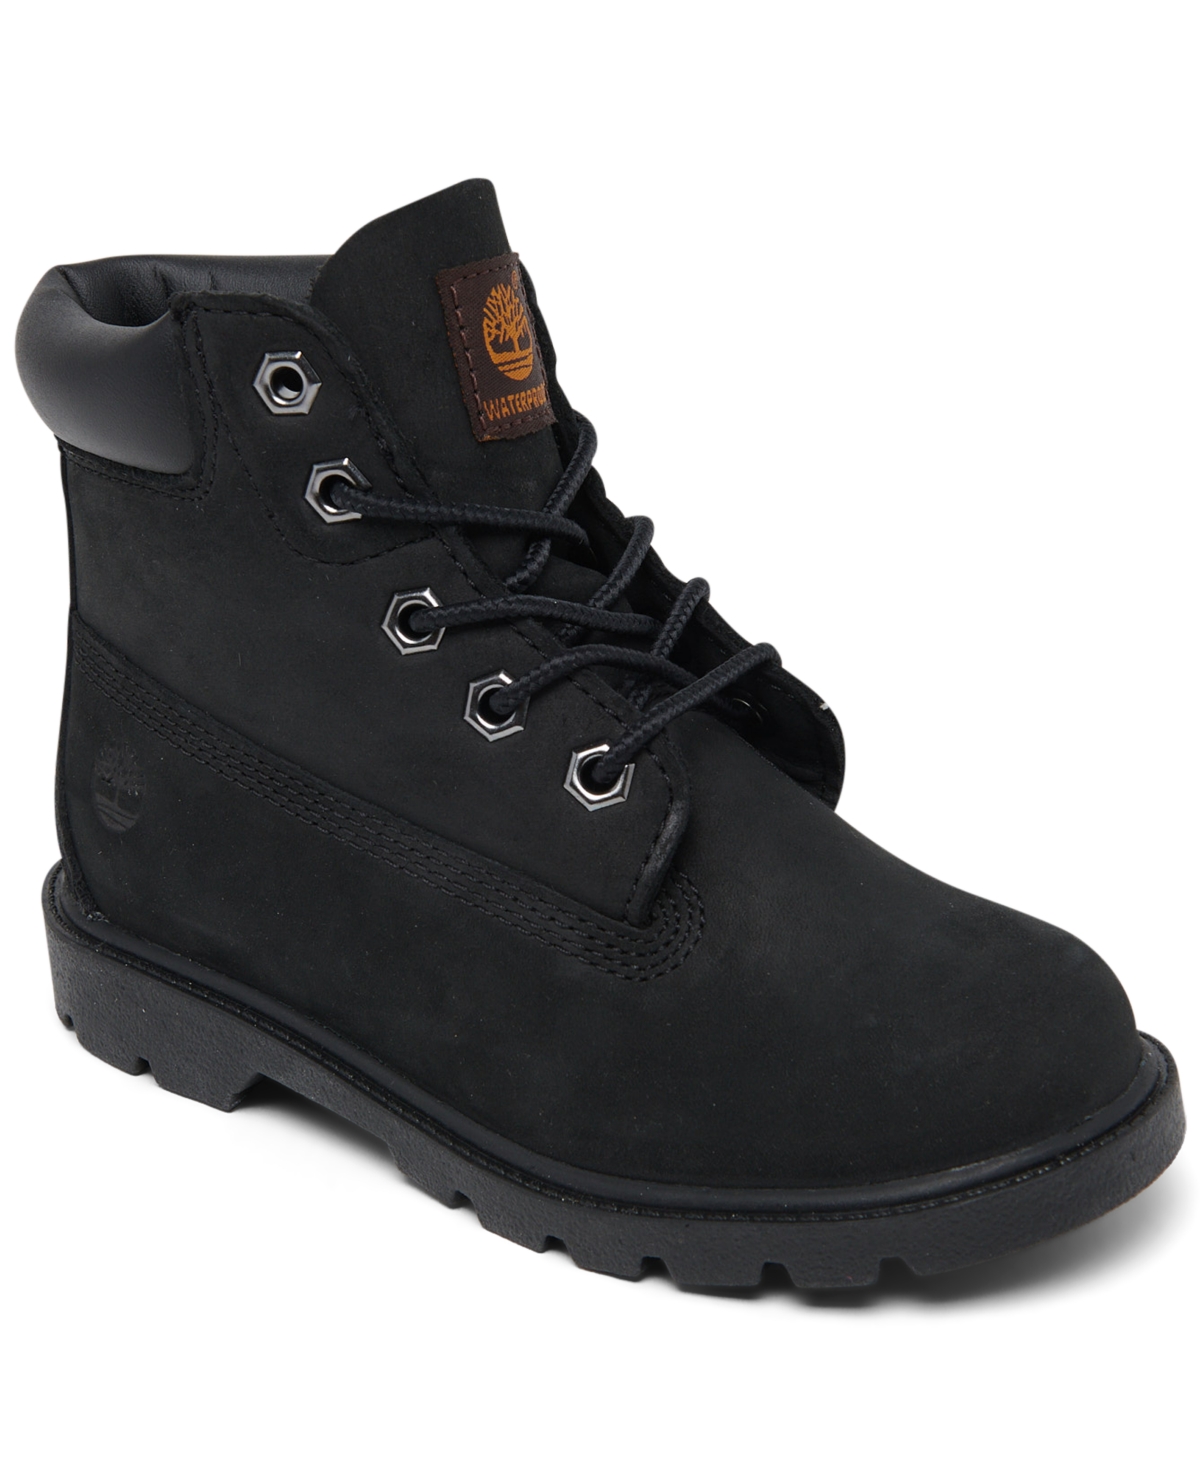 Shop Timberland Toddler Kids 6" Classic Water Resistant Boots From Finish Line In Black